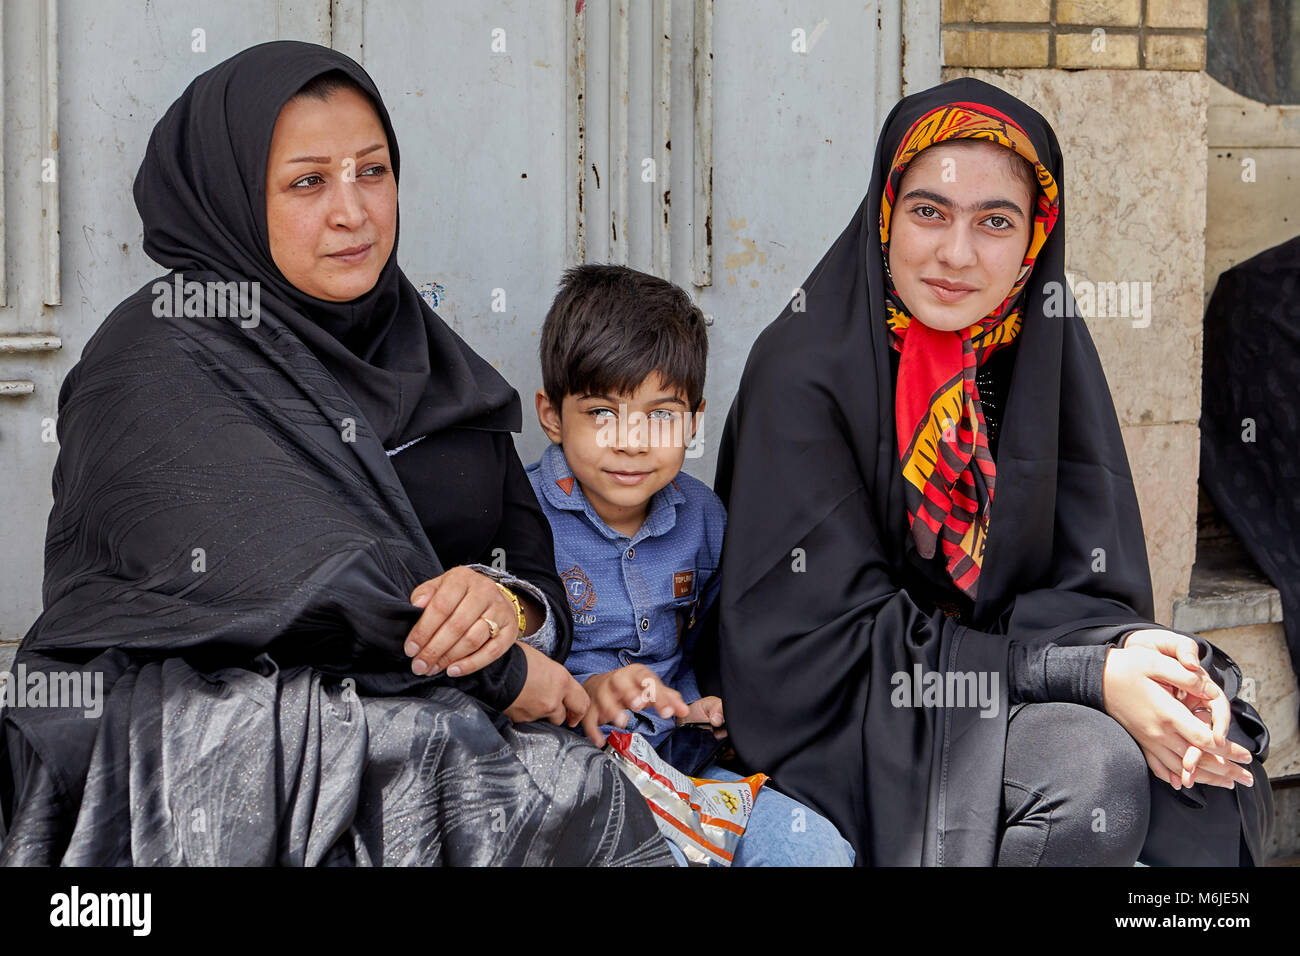 Kashan, Iran - April 27, 2017: A Muslim family, two women and one young boy, are waiting for the municipal bus at a public transport stop. Stock Photo